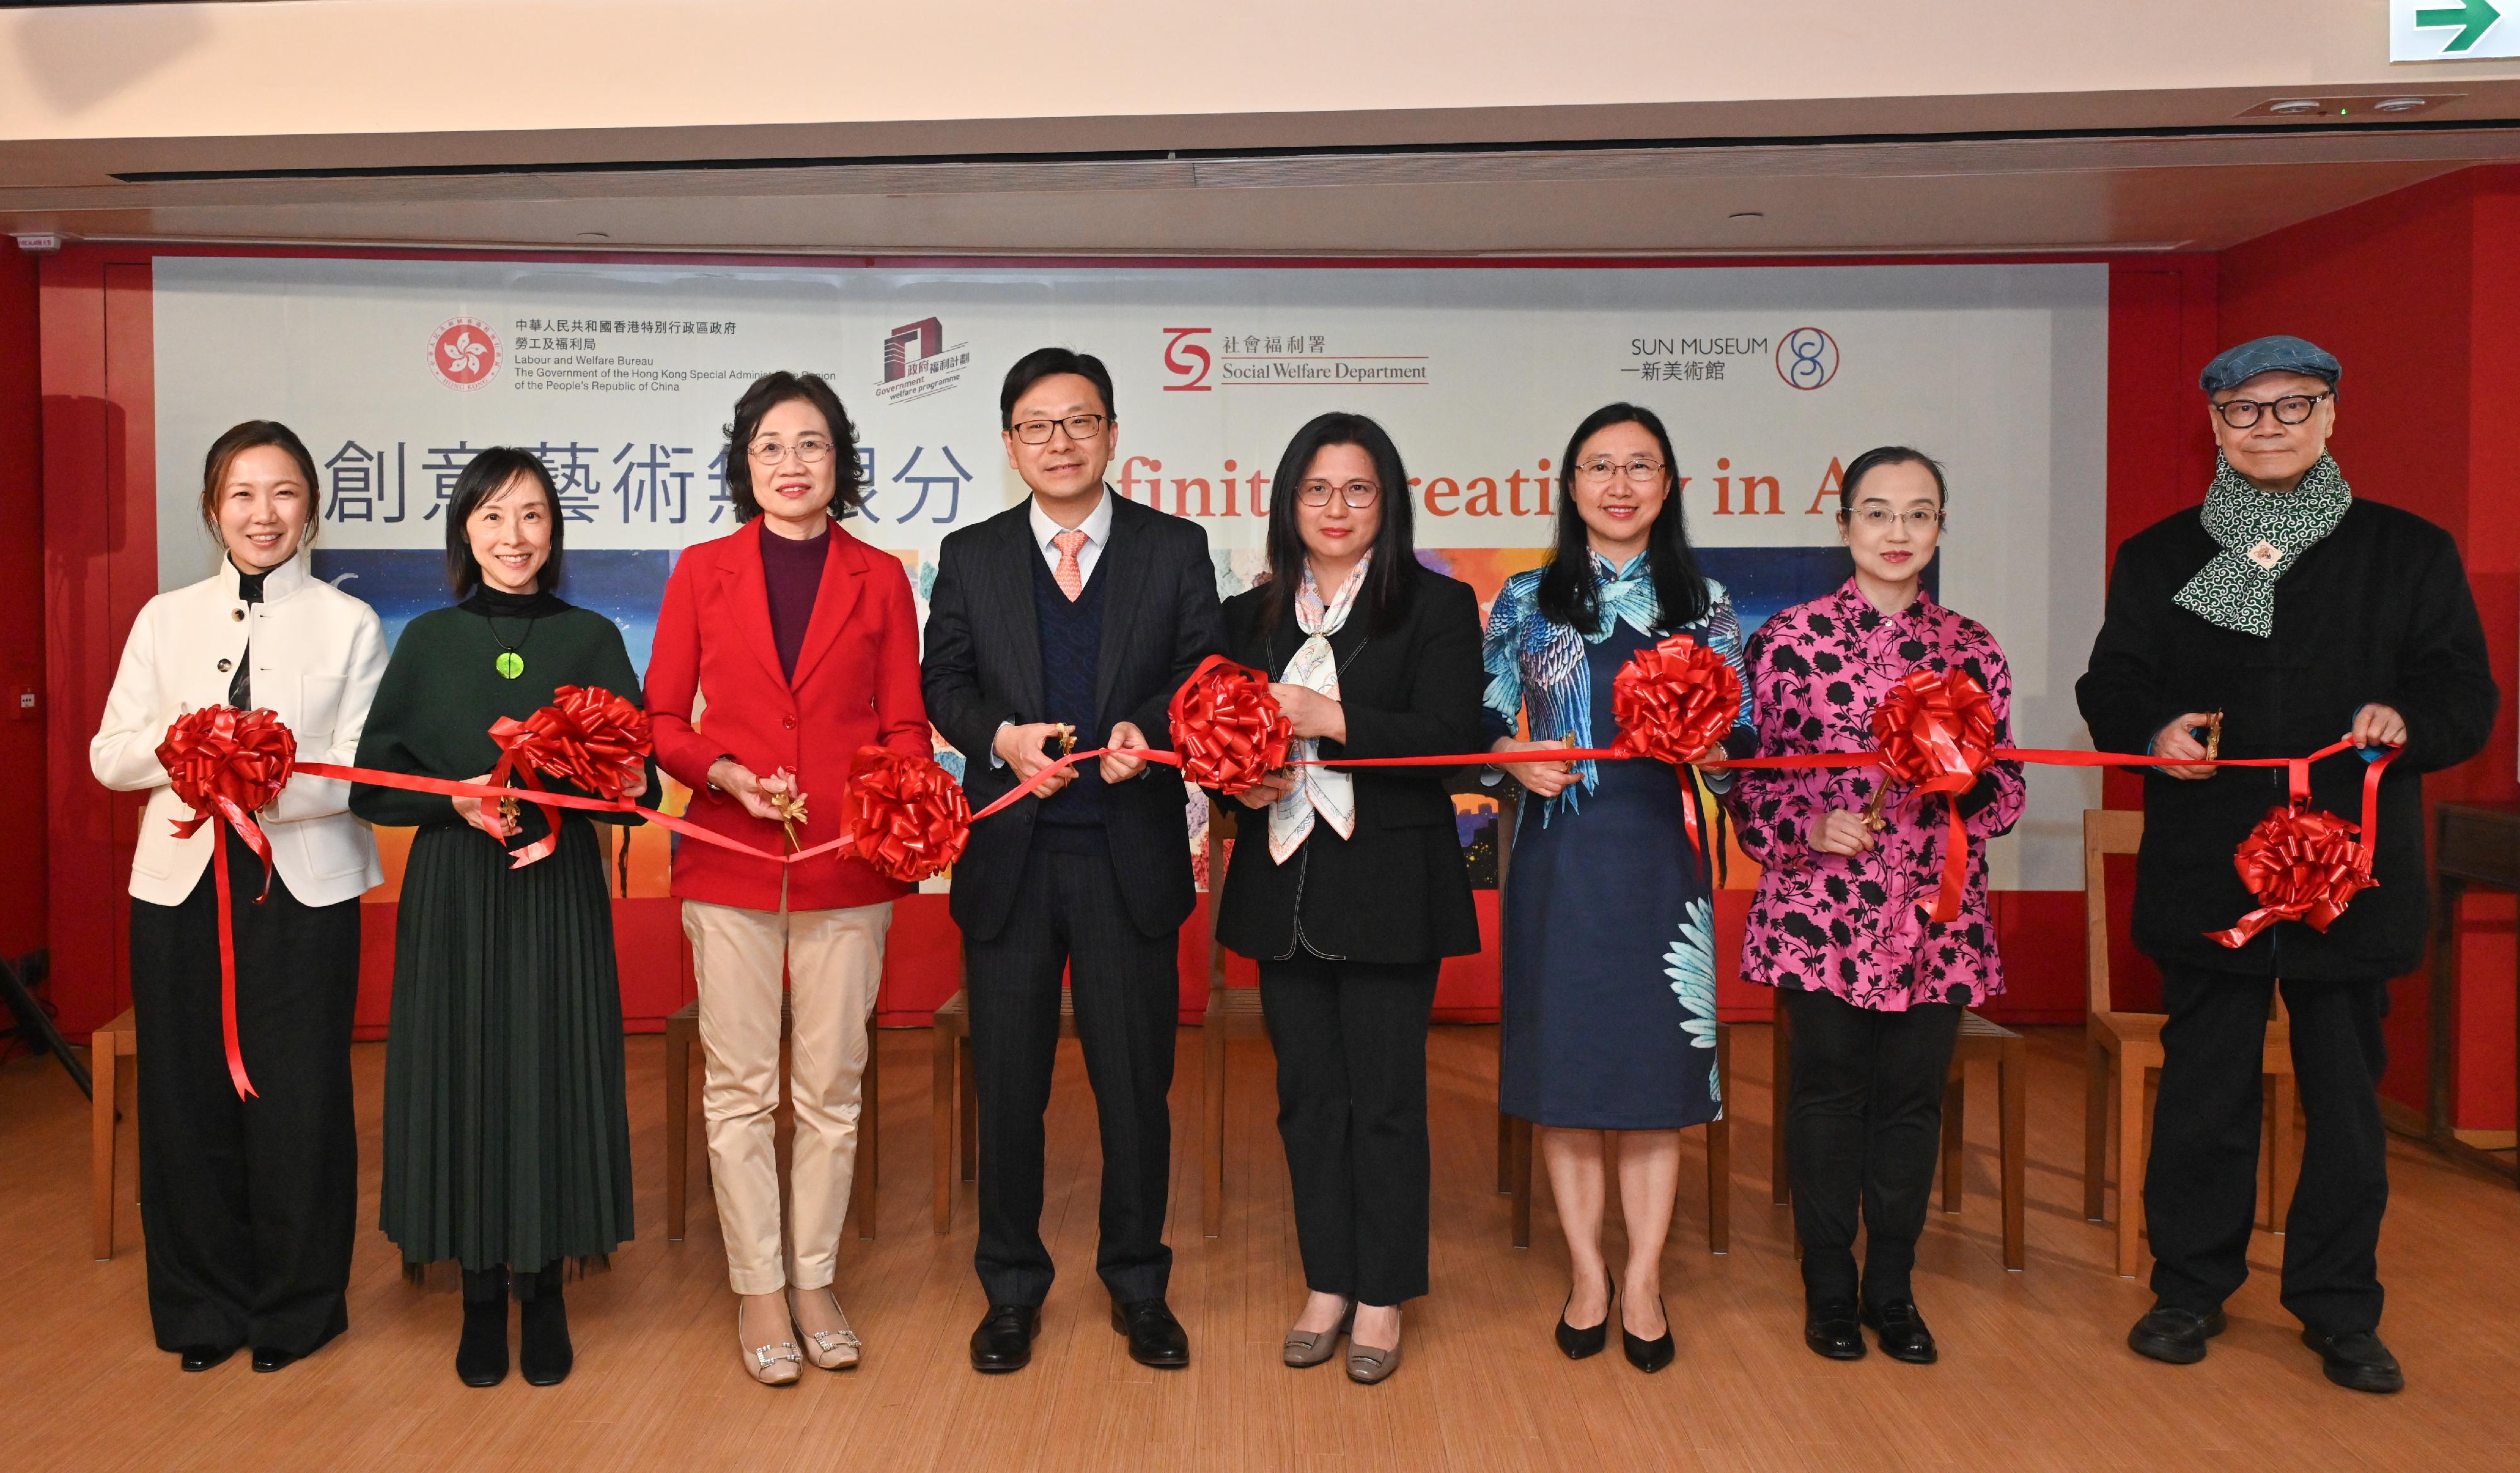 The Opening Ceremony of the "Infinite Creativity in Art" Exhibition, jointly organised by the Labour and Welfare Bureau (LWB), the Social Welfare Department, the Arts Development Fund for Persons with Disabilities and Sun Museum, was held today (January 11). Photo shows the Secretary for Labour and Welfare, Mr Chris Sun (fourth left); the Chairman of the Board of Directors of Yan Chai Hospital and Founding Director of Simon Suen Foundation, Mrs Mary Suen (third left); the Chair of Simon Suen Foundation, Dr Chloe Suen (first left); the Permanent Secretary for Labour and Welfare, Ms Alice Lau (third right); the Director of Social Welfare, Miss Charmaine Lee (second left); the Commissioner for Rehabilitation of the LWB, Miss Vega Wong (second right); and the Director of Sun Museum, Mr Yeung Chun-tong (first right), officiating at the ceremony.